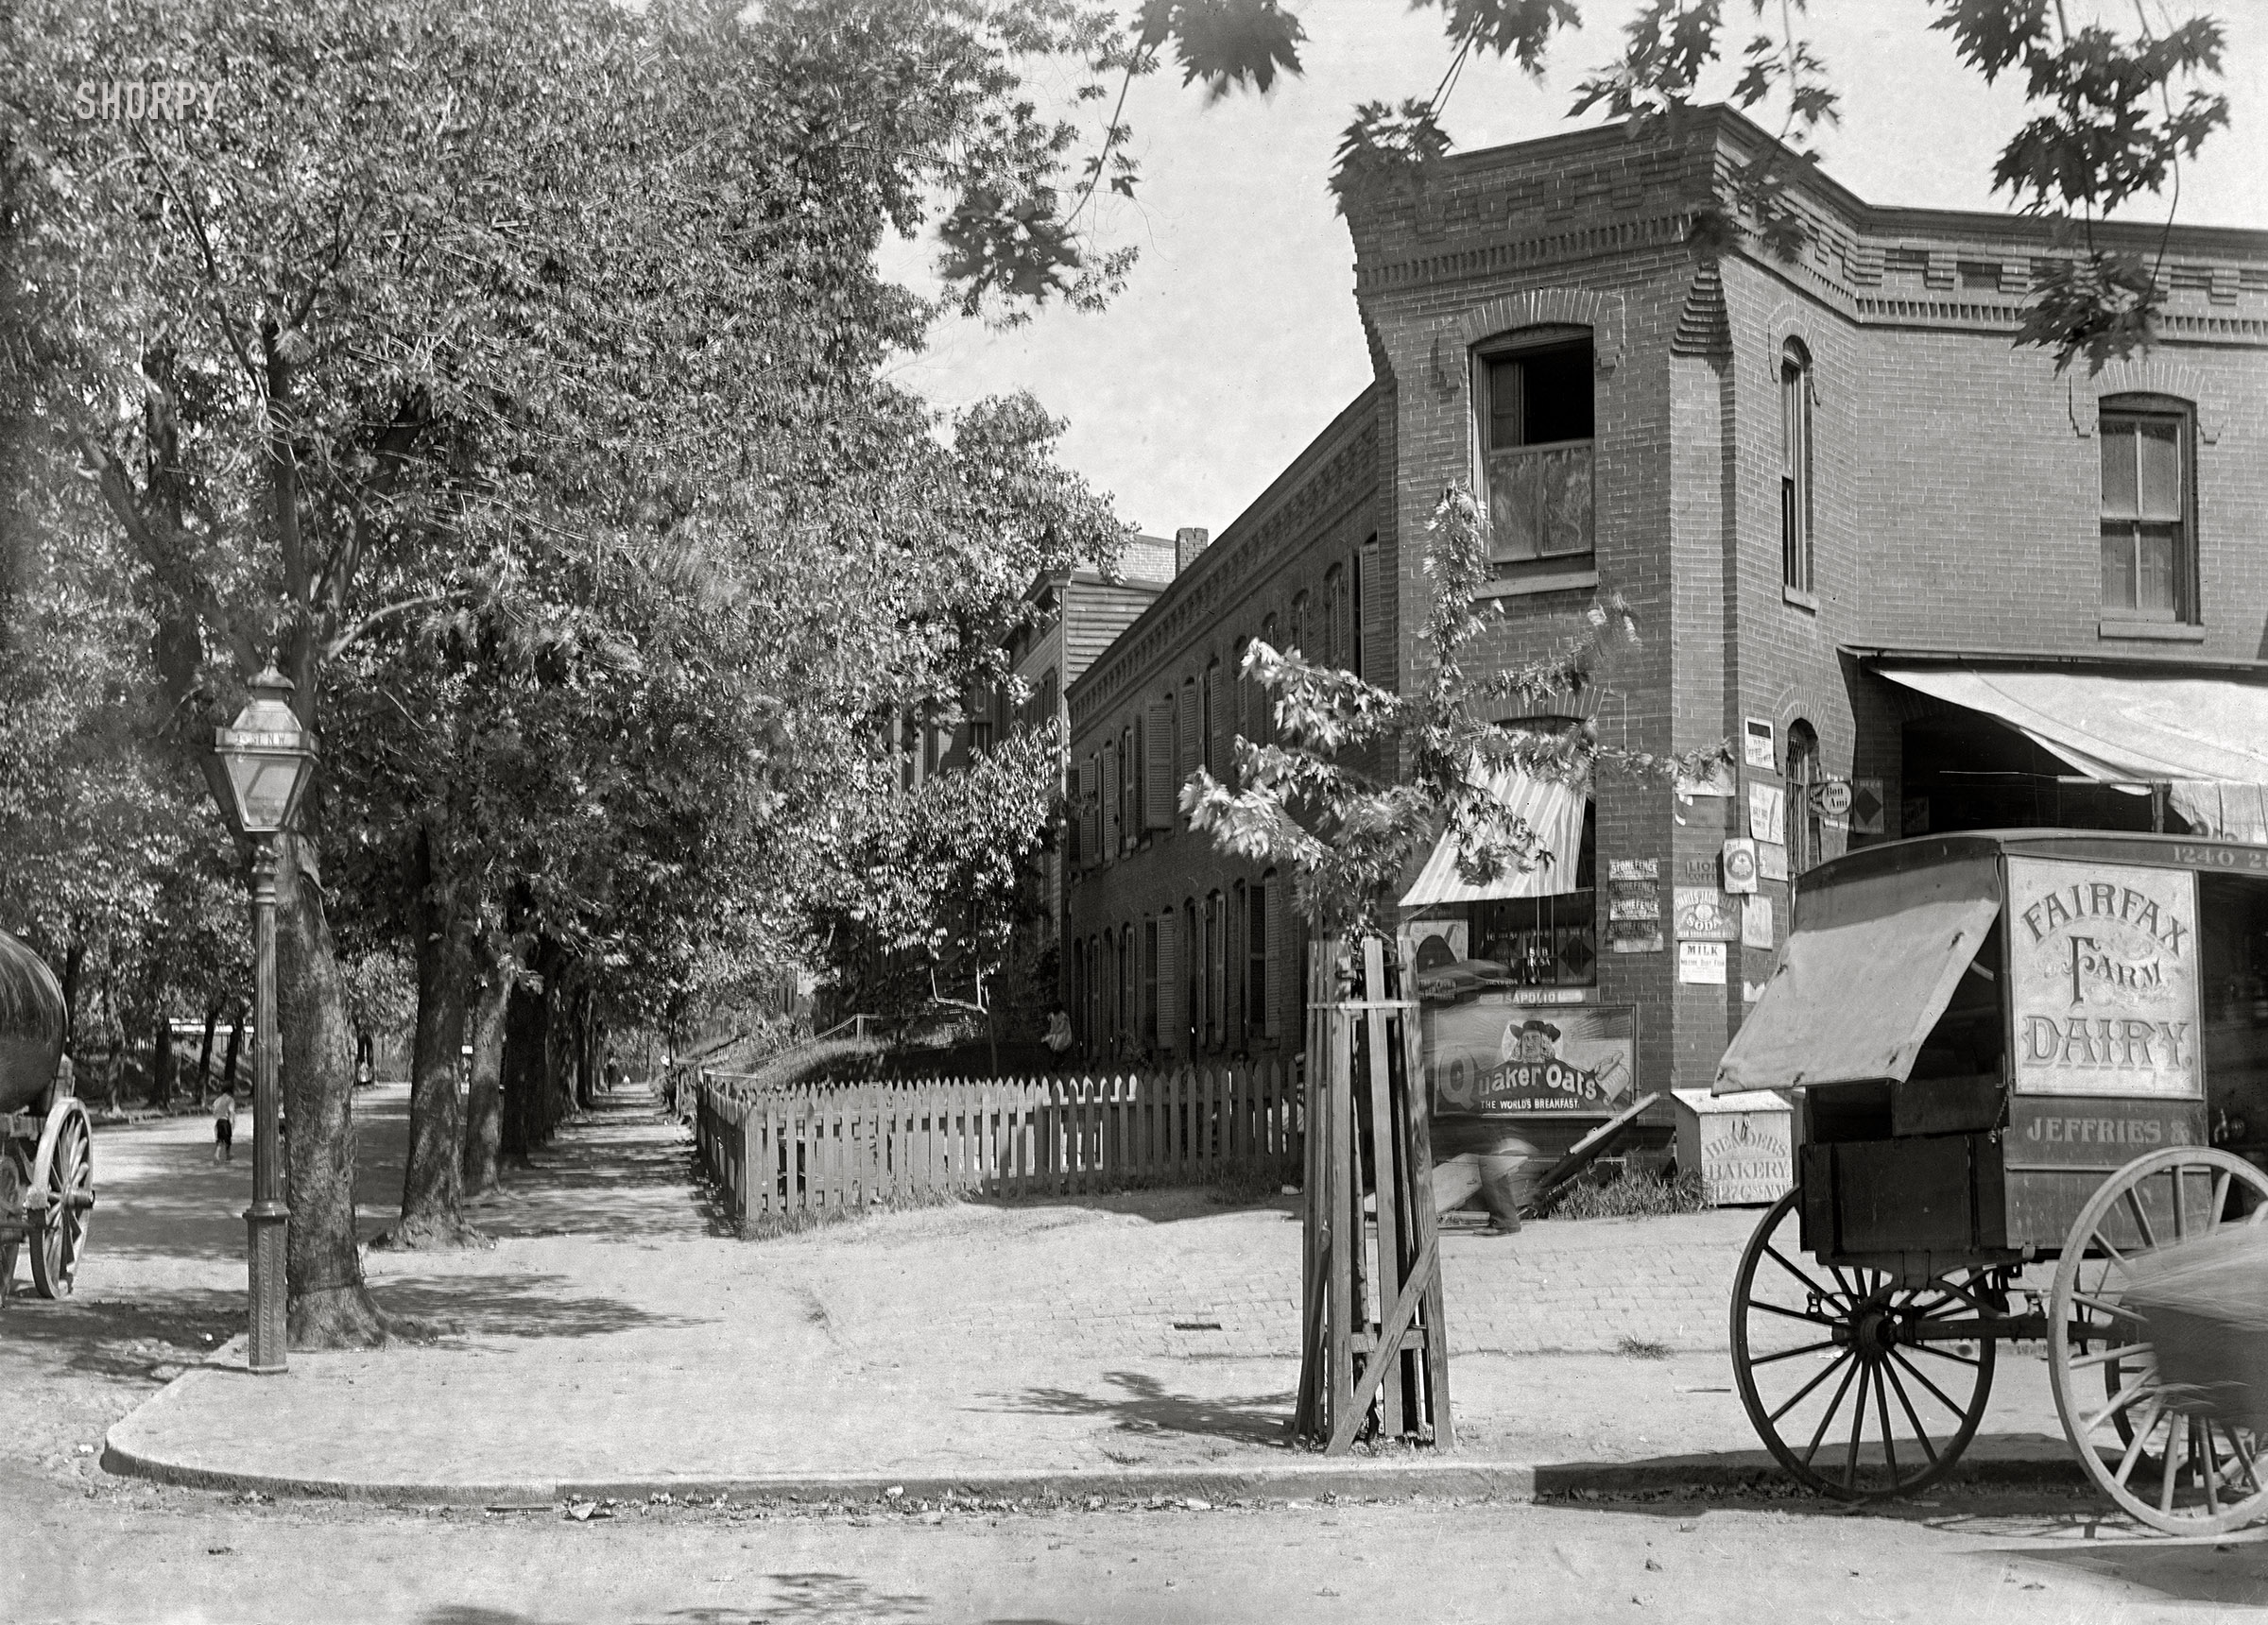 Washington, D.C., circa 1901. "View of 21st Street N.W., east side, looking north from E Street, with dairy cart at the curb in front of a corner shop." 5x7 inch glass negative.  View full size.